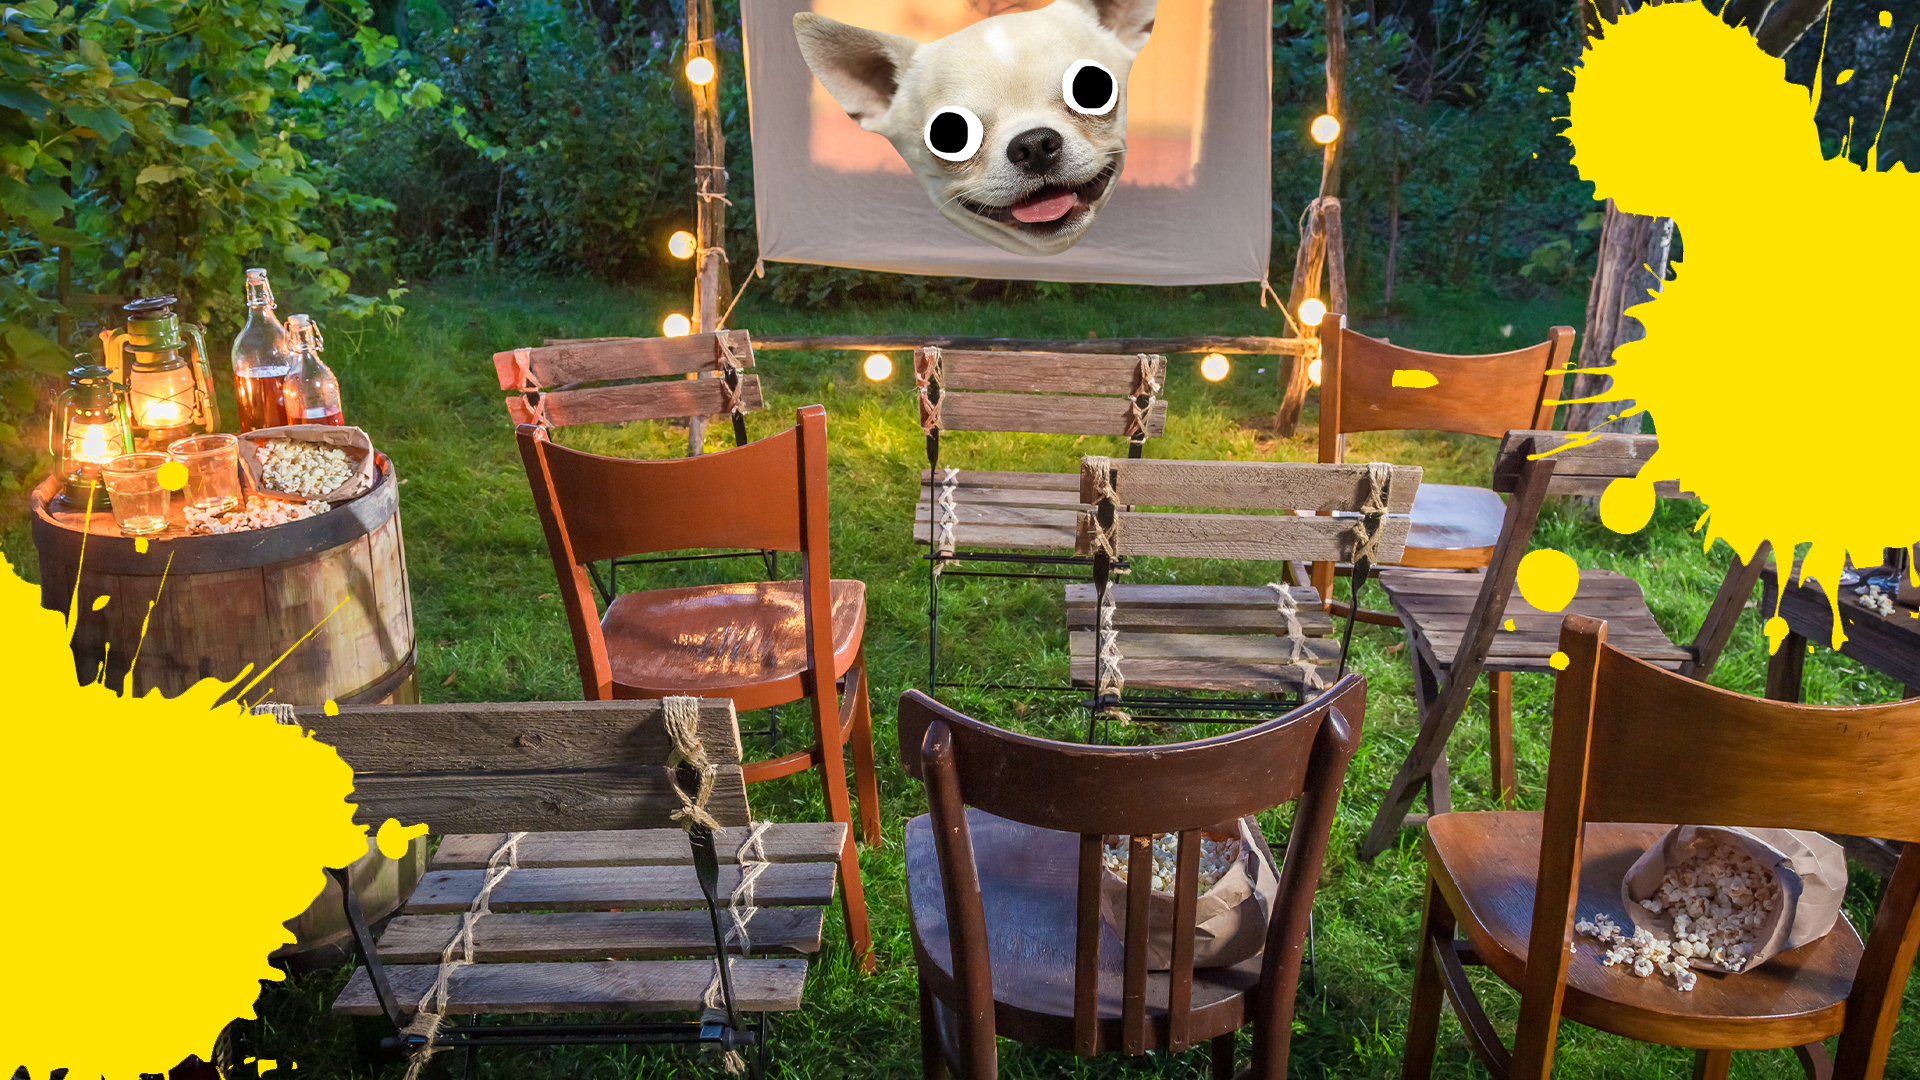 Outdoor cinema with derpy dog face and yellow splats 